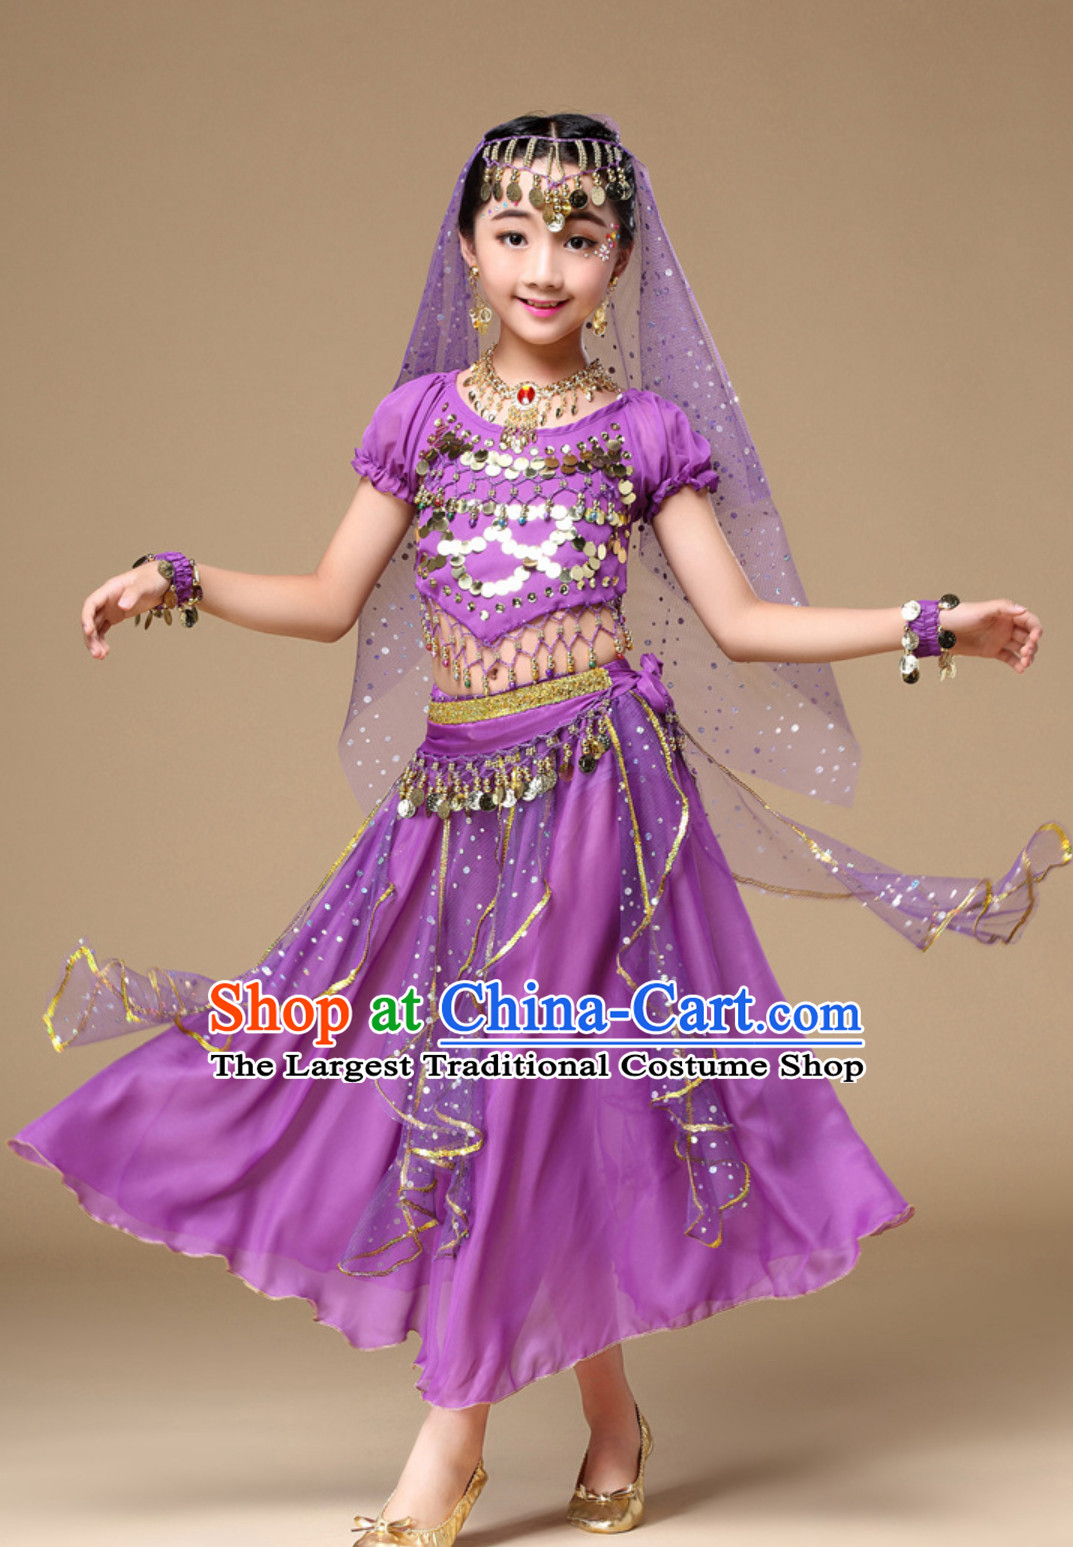 Purple Color Indian Traditional Belly Dancing Costumes Asian India Oriental Dance Costume Complete Set for Kids